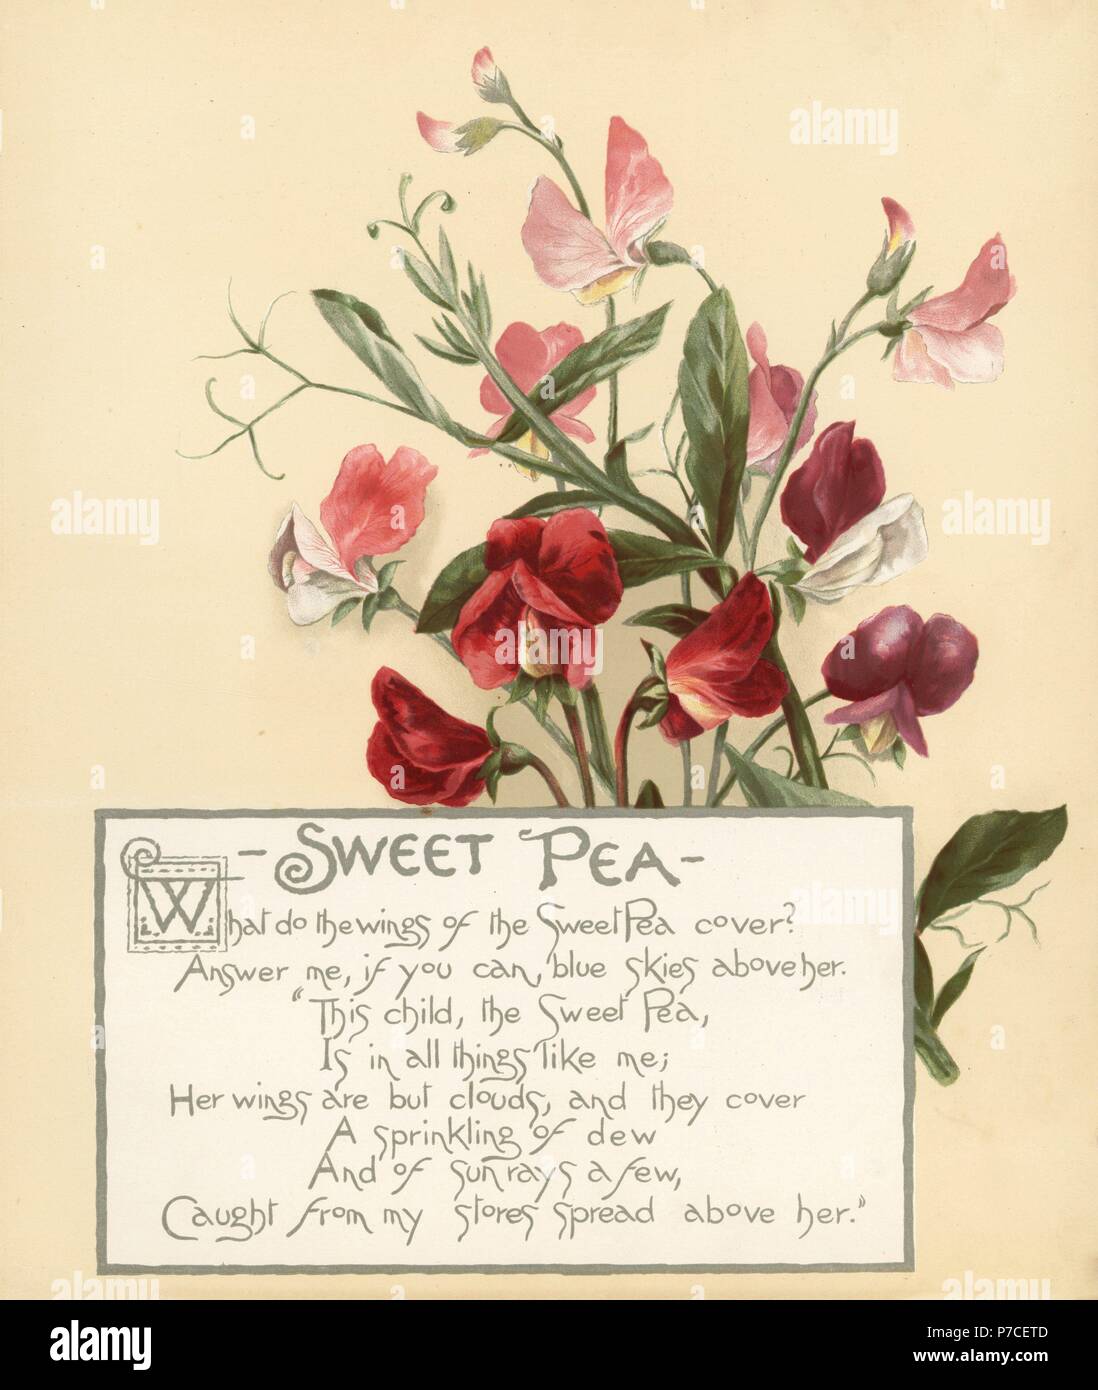 Sweet pea, Lathyrus odoratus, and calligraphic poem. Chromolithograph by Louis Prang from Alice Ward Bailey's Flower Fancies, Boston, 1889. Illustrated by Lucy Baily, Eleanor Ecob Morse, Olive Whitney, Ellen Fisher, Fidelia Bridges, C. Ryan and F. Schuyler Mathews. Stock Photo